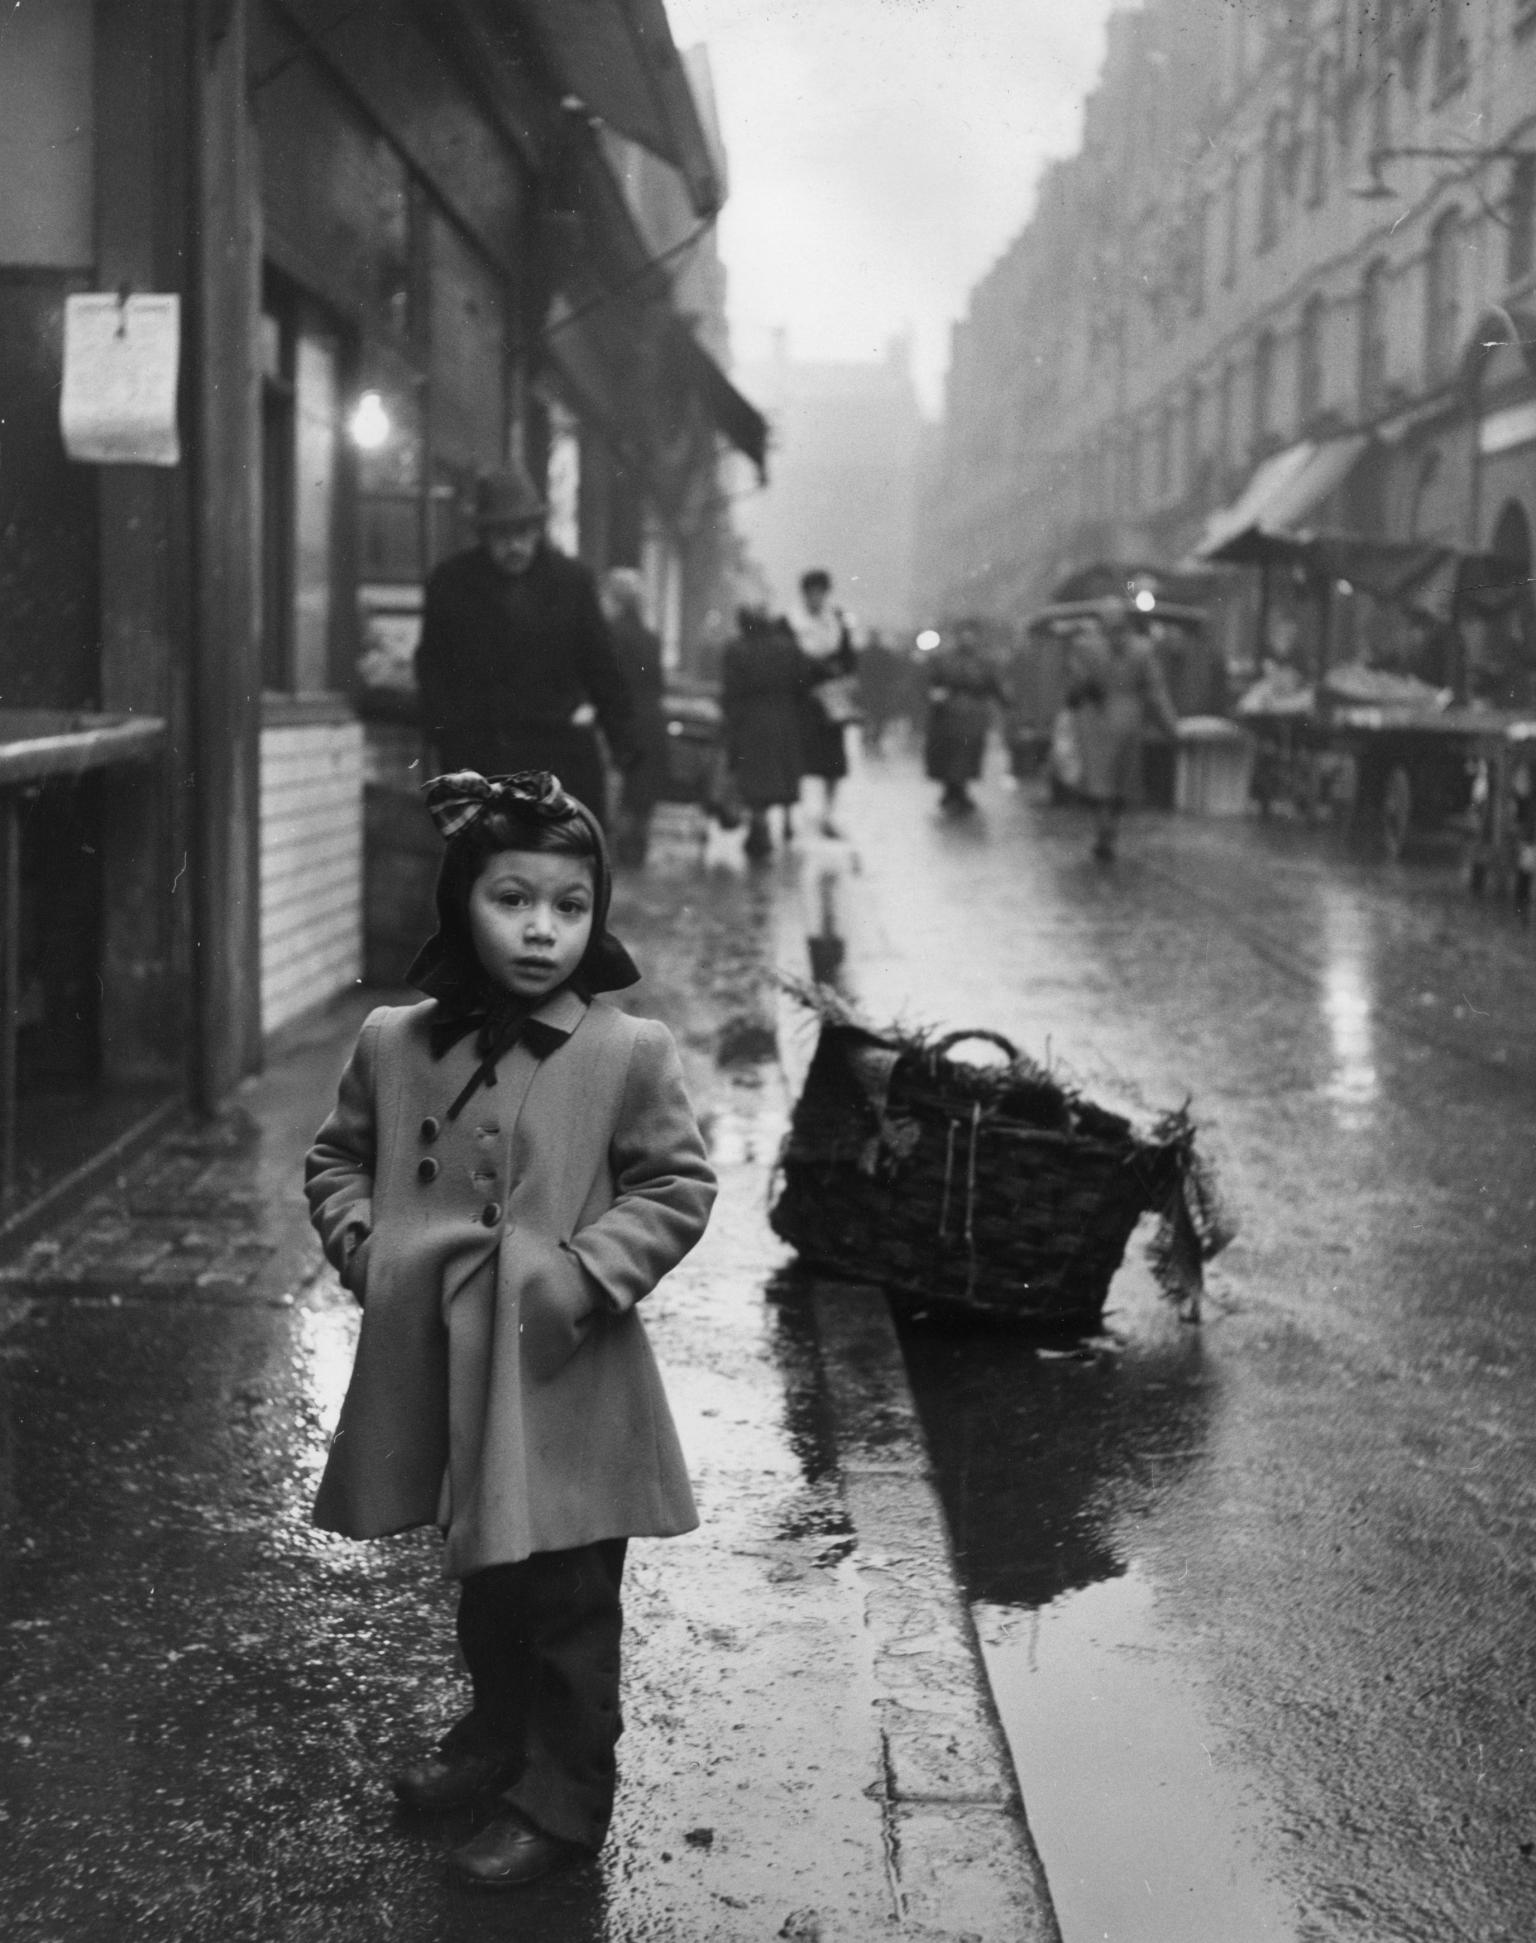 Photograph of little girl standing on rainy sidewalk of a busy city street wearing a coat and a bow facing the viewer, and basket on curb behind her.